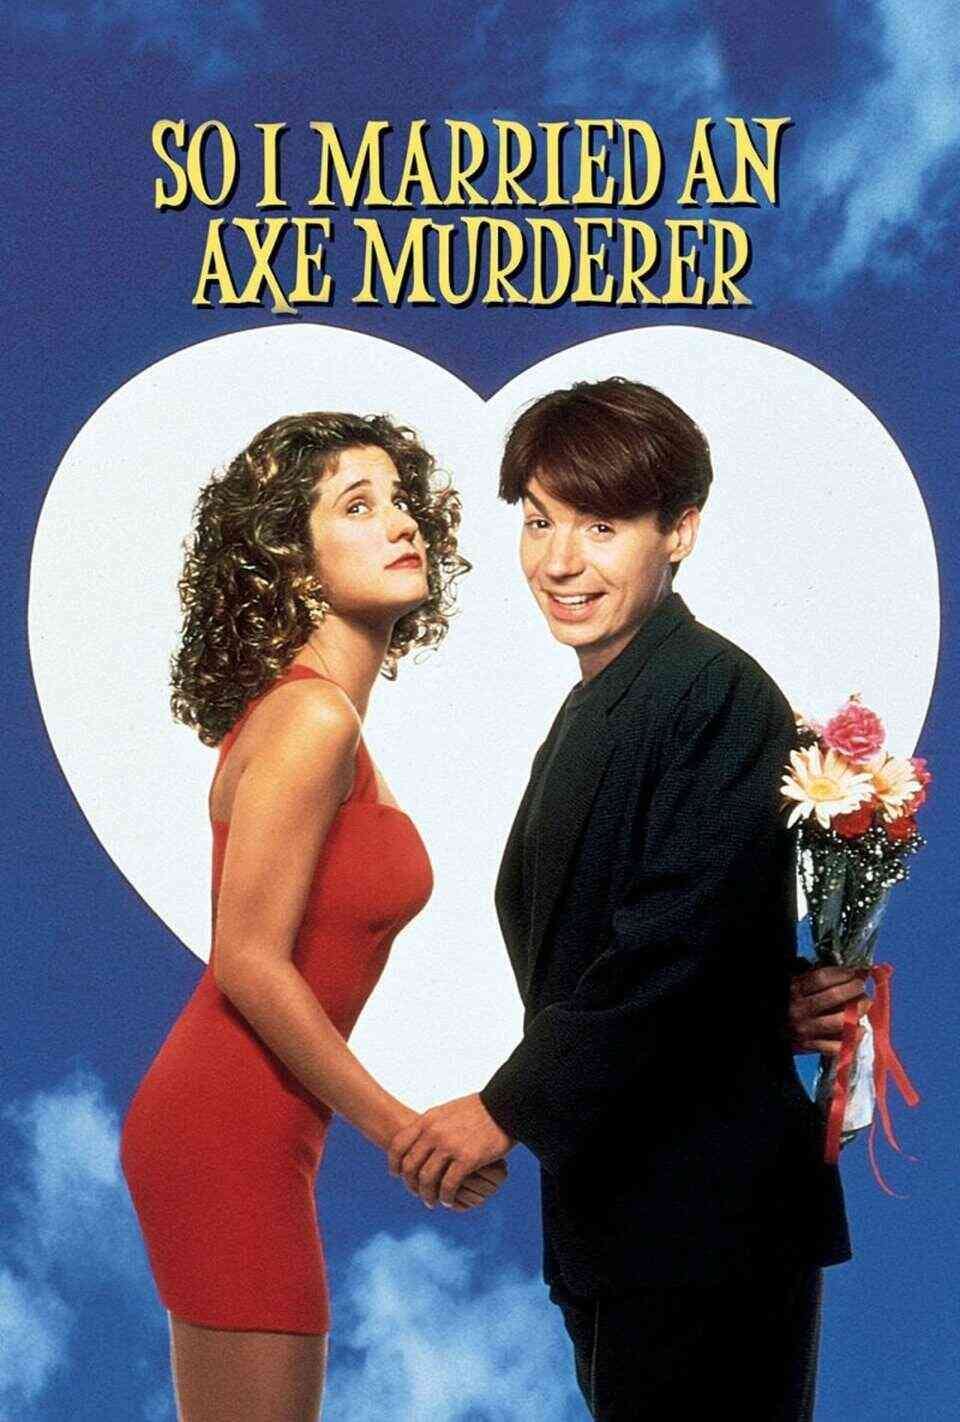 Read So I Married An Axe Murderer screenplay (poster)